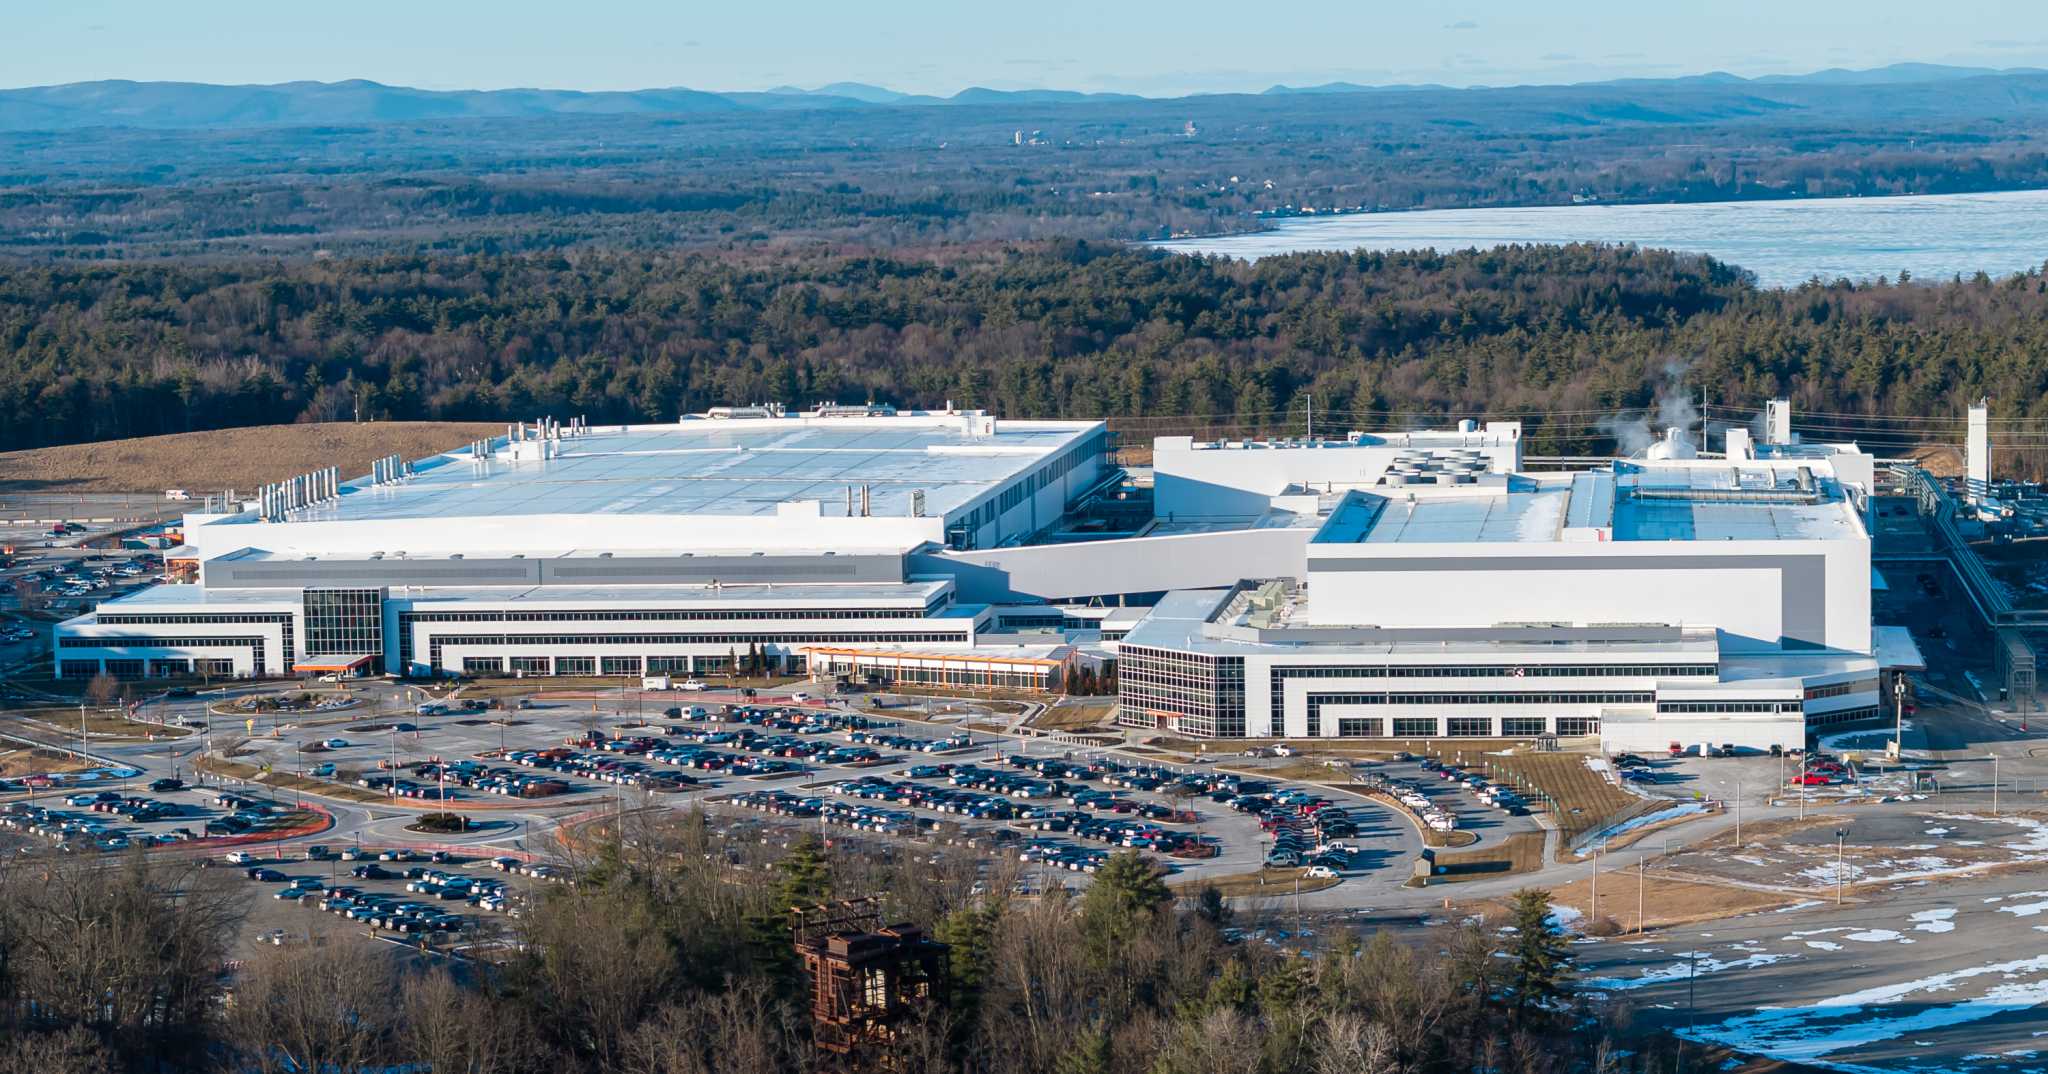 Revenues and profit dropped at GlobalFoundries in first quarter